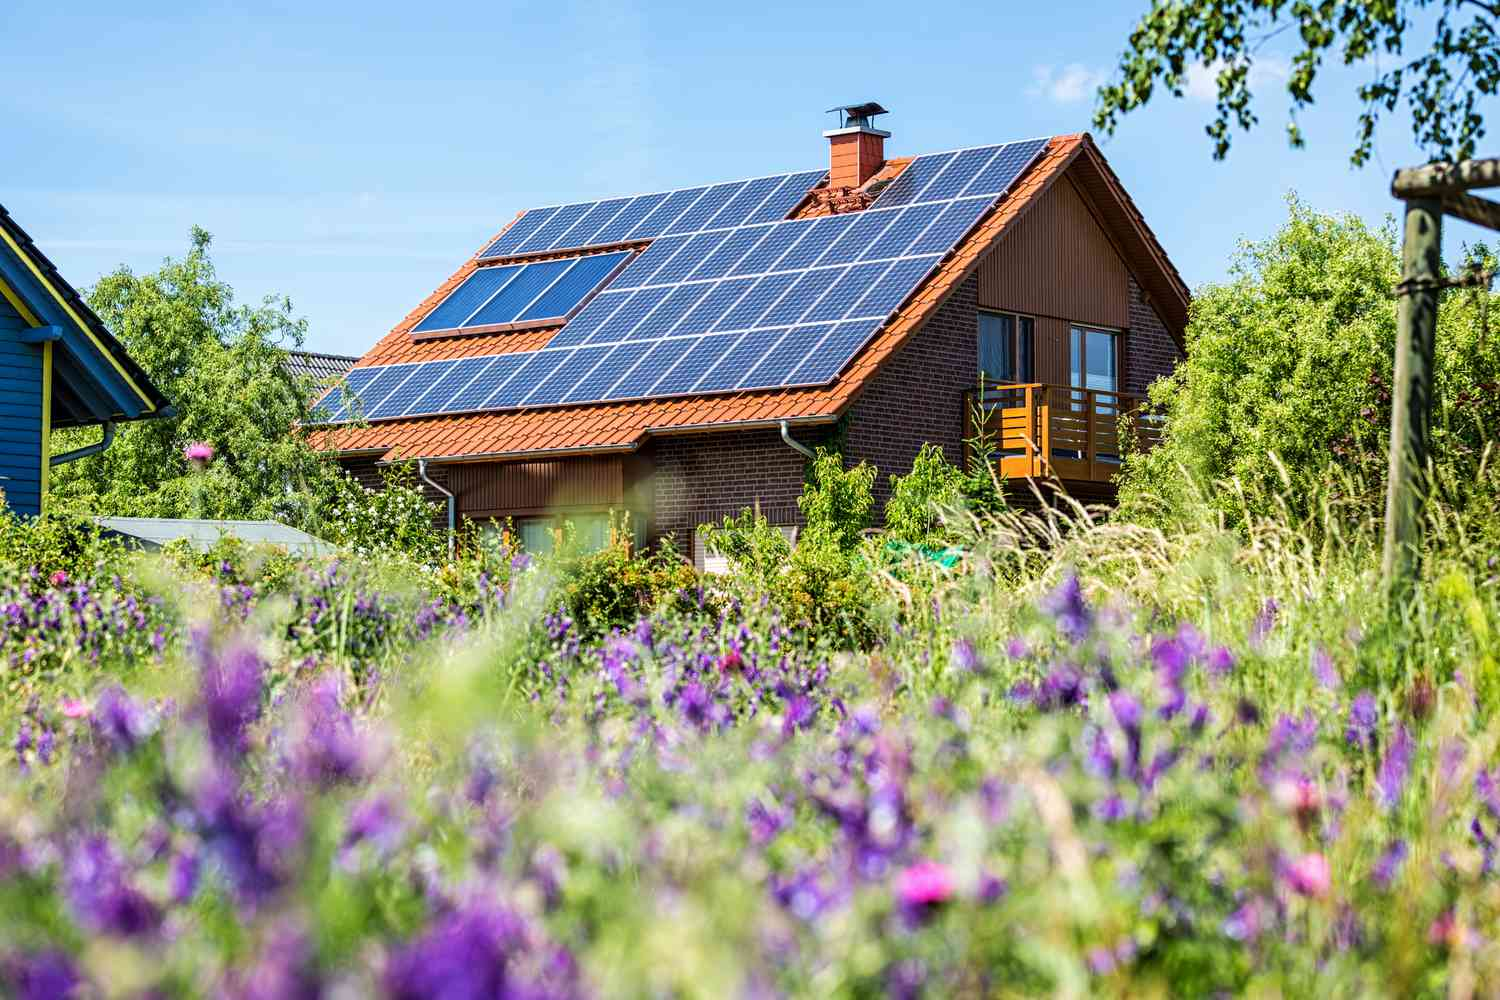 How Much Do Solar Panels Save on Average Electricity Bills?